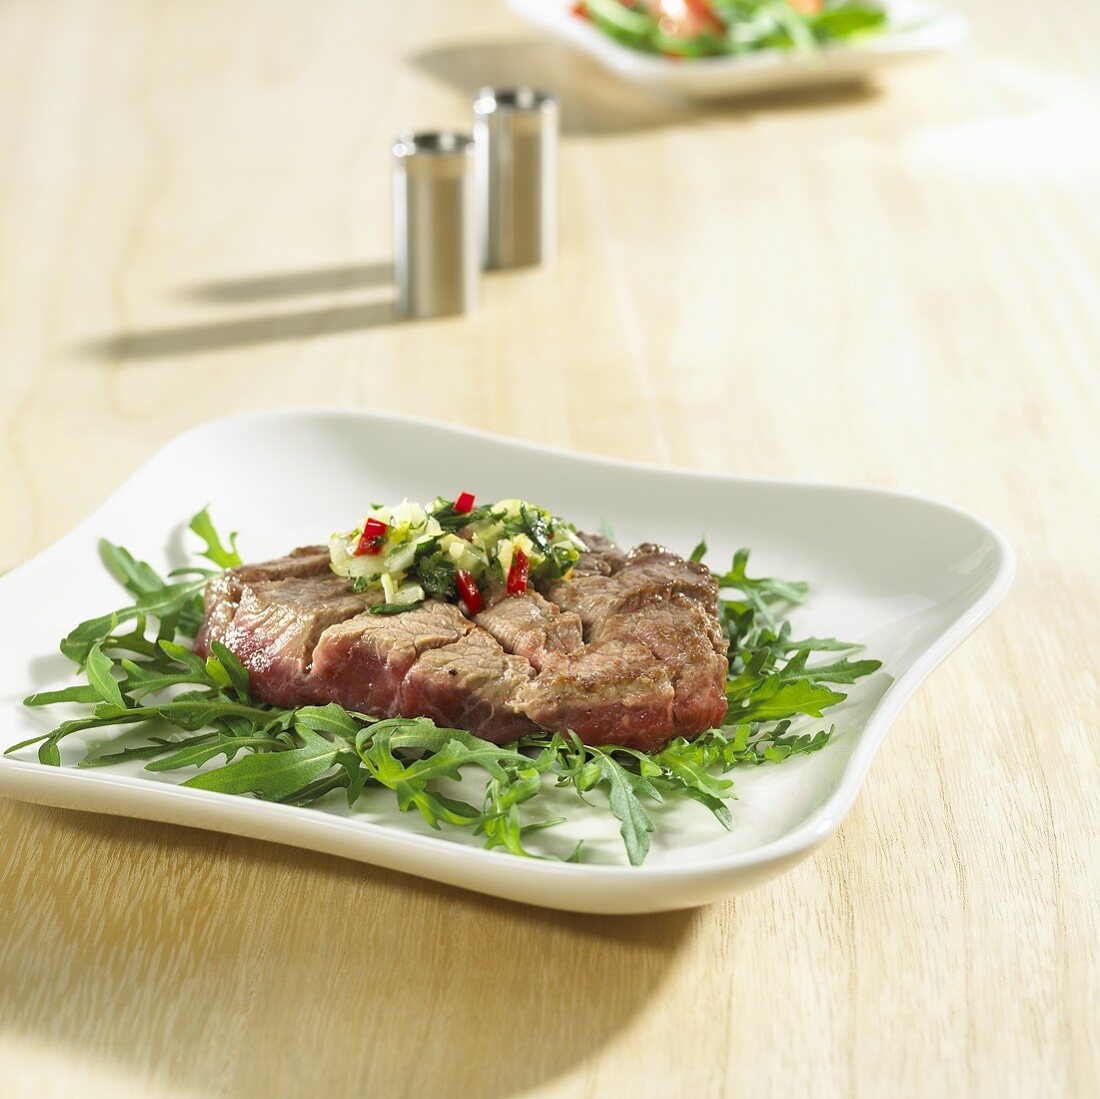 Seared beef fillet with shallots, parsley, rocket